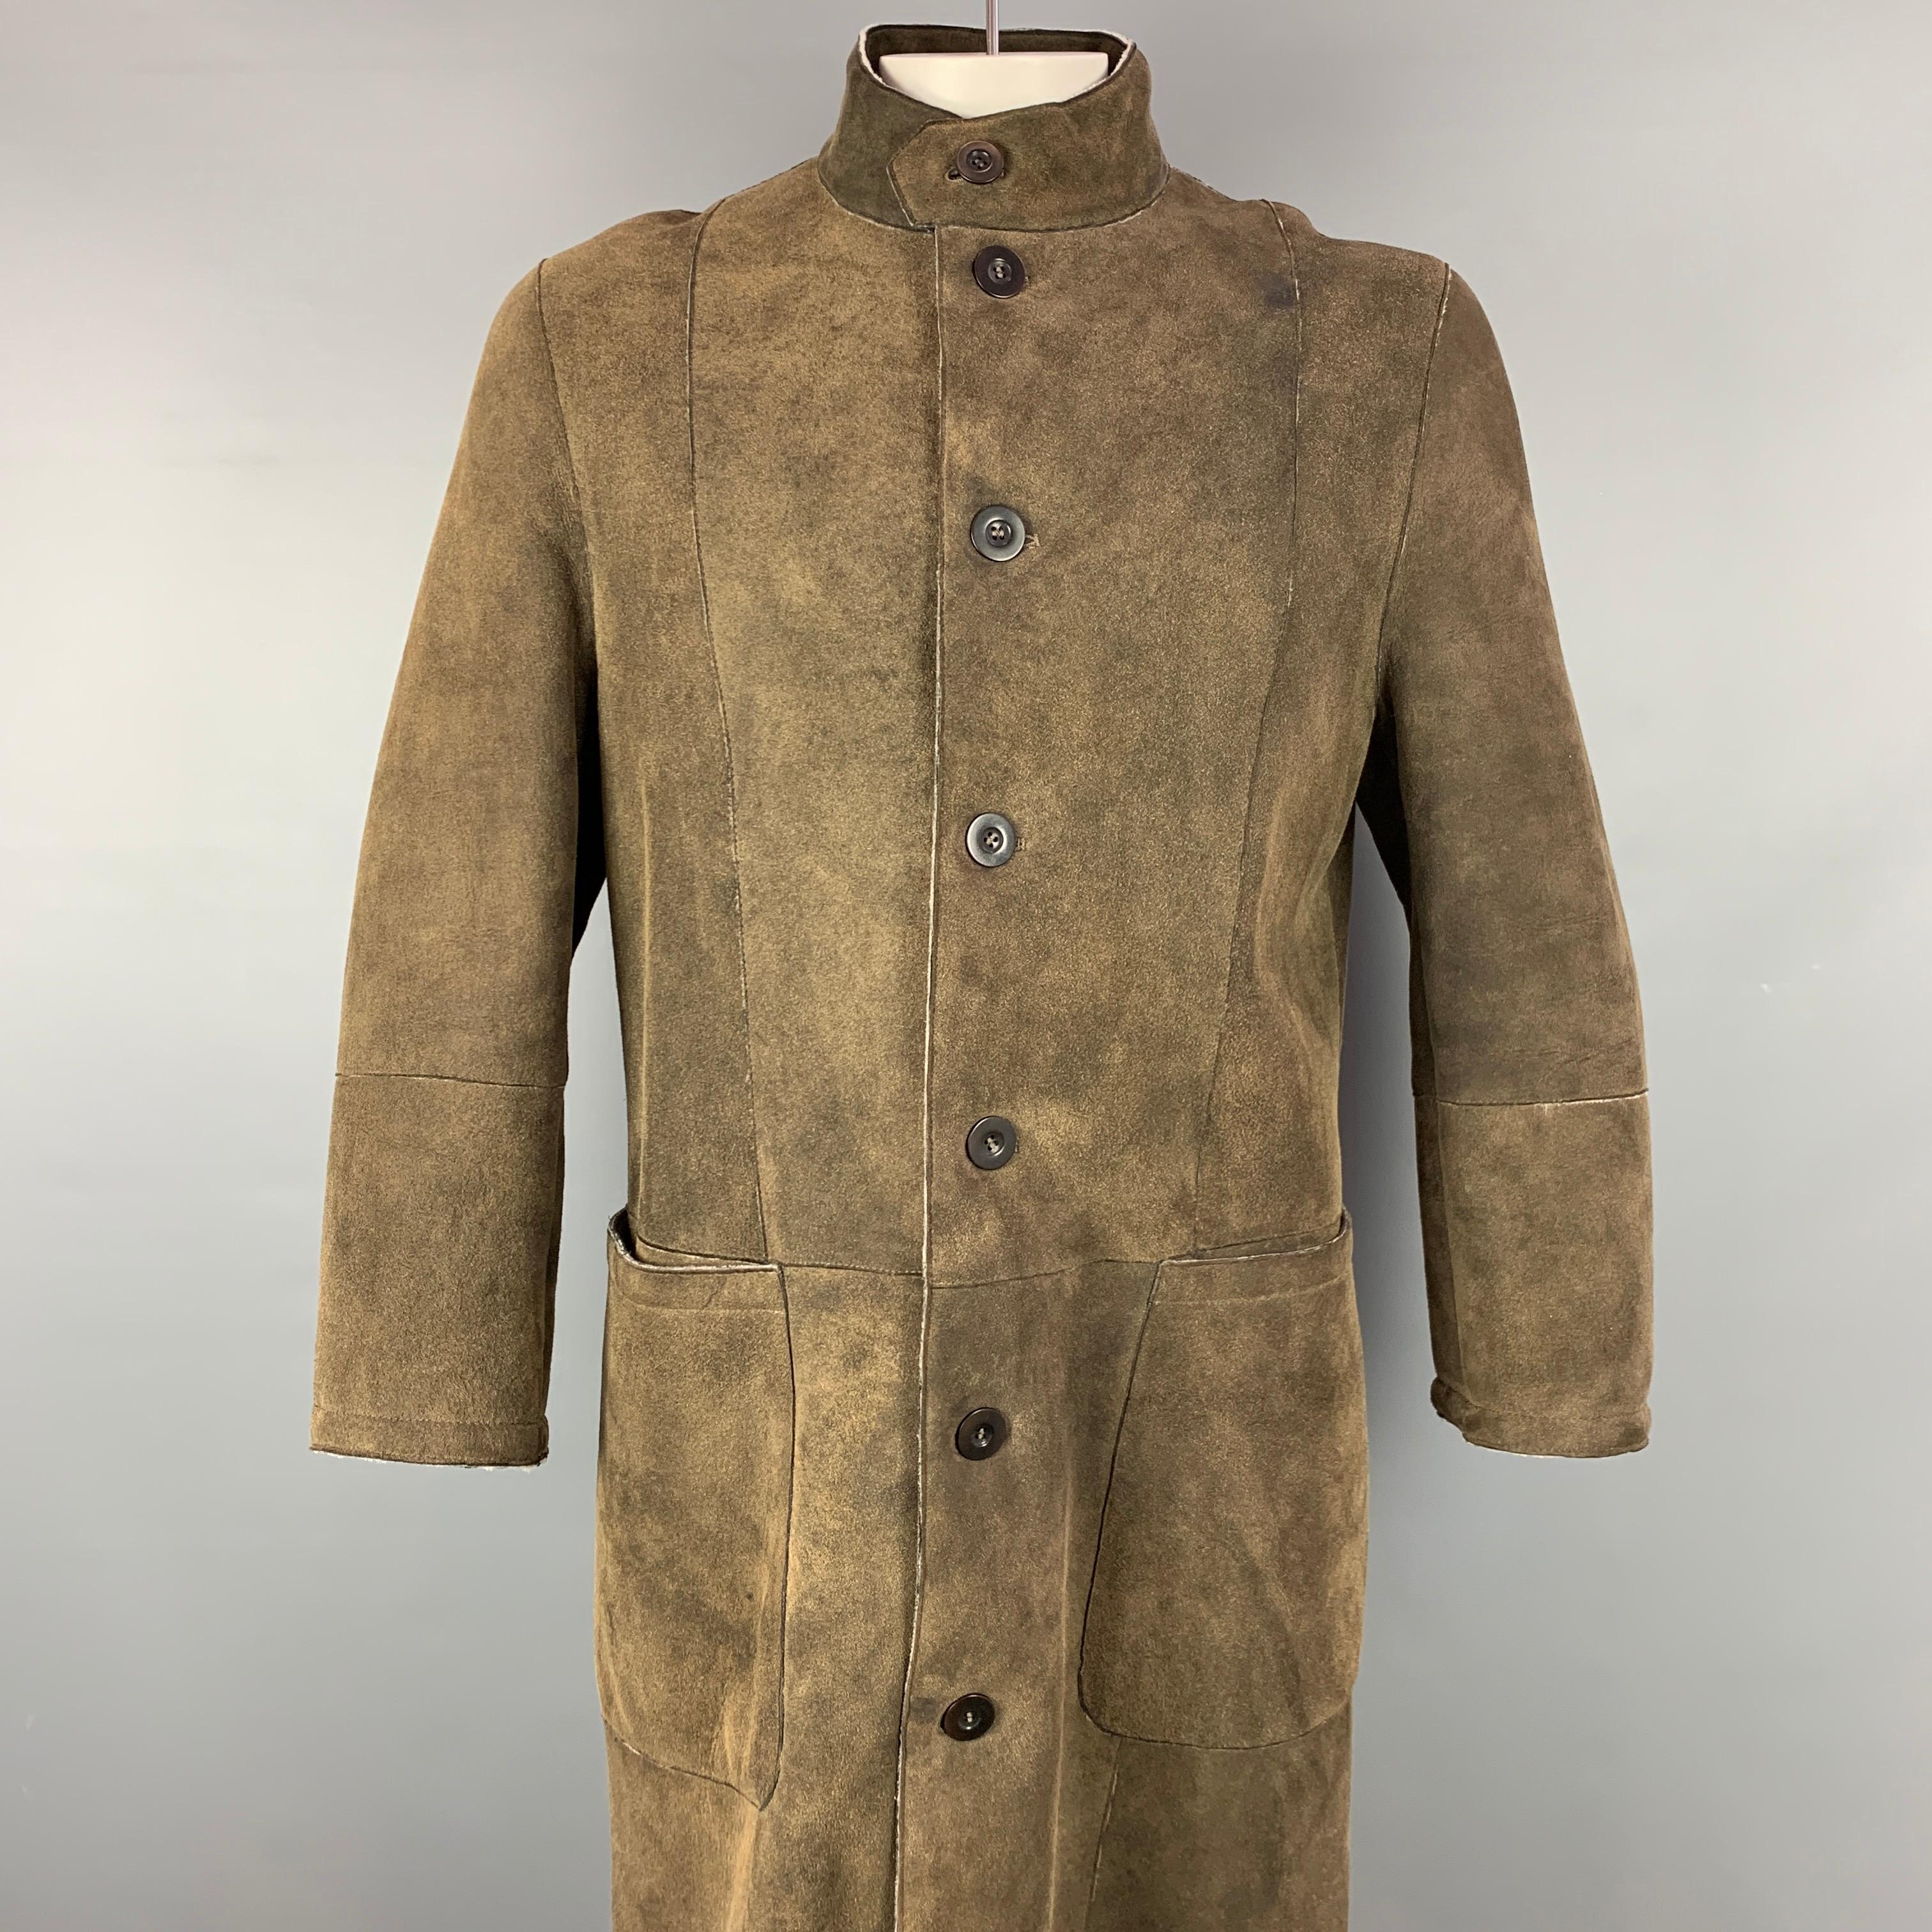 ARMANI COLLEZIONI coat comes in a olive distresses shearling sheepskin with a fur liner featuring a nehru collar, top stitching, front patch pockets, back slit, and a buttoned closure. Made in Italy. 

Very Good Pre-Owned Condition.
Marked: